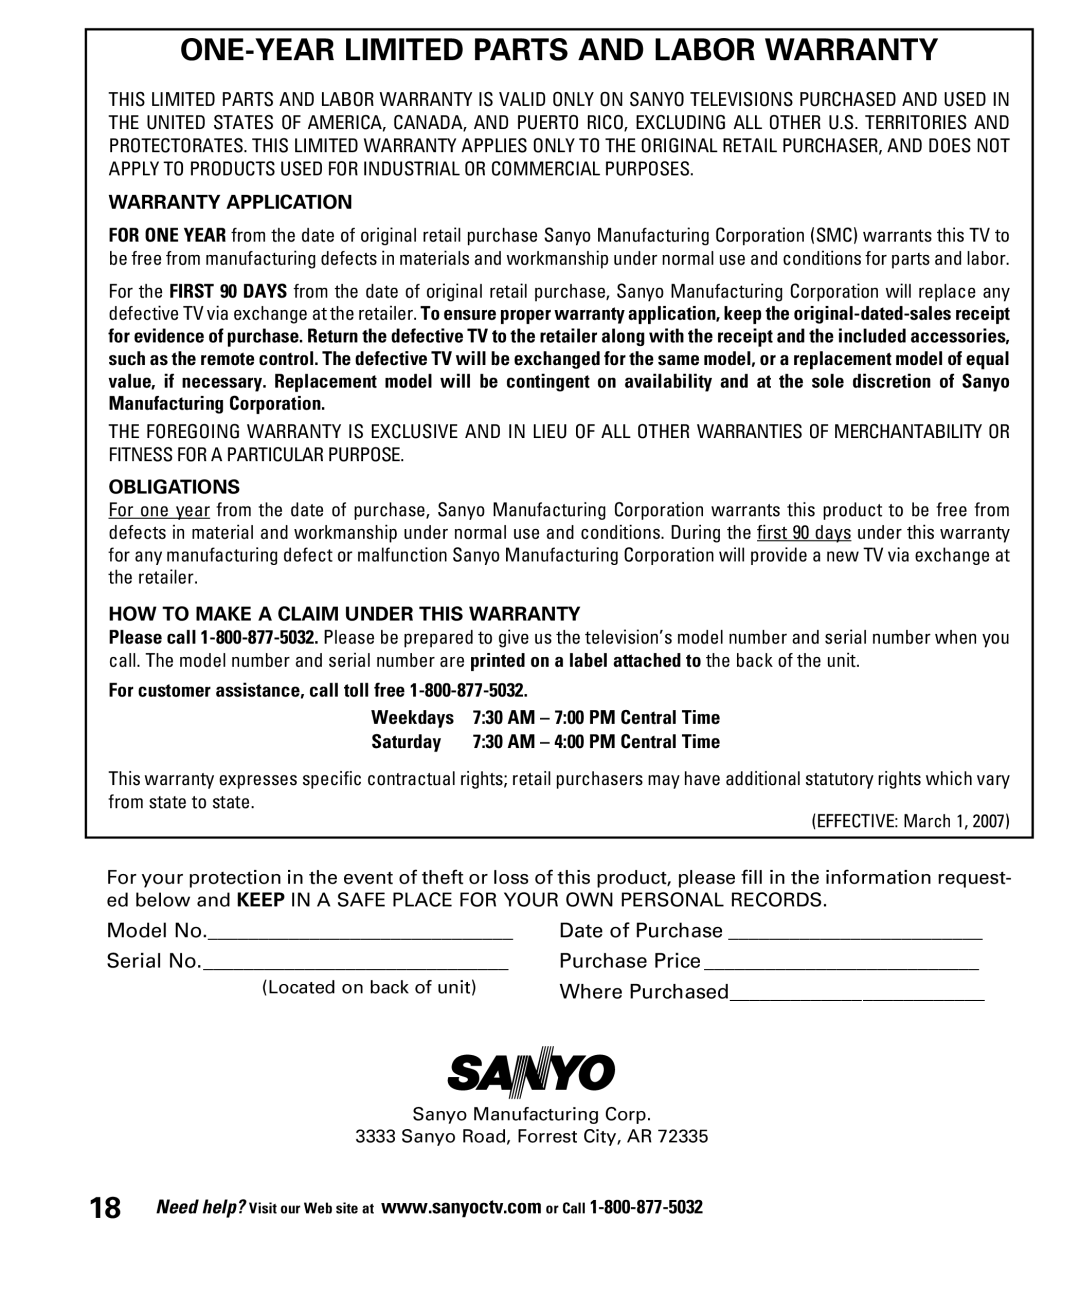 Sanyo DP52848 ONE-YEAR Limited Parts and Labor Warranty, For customer assistance, call toll free Weekdays, Saturday 